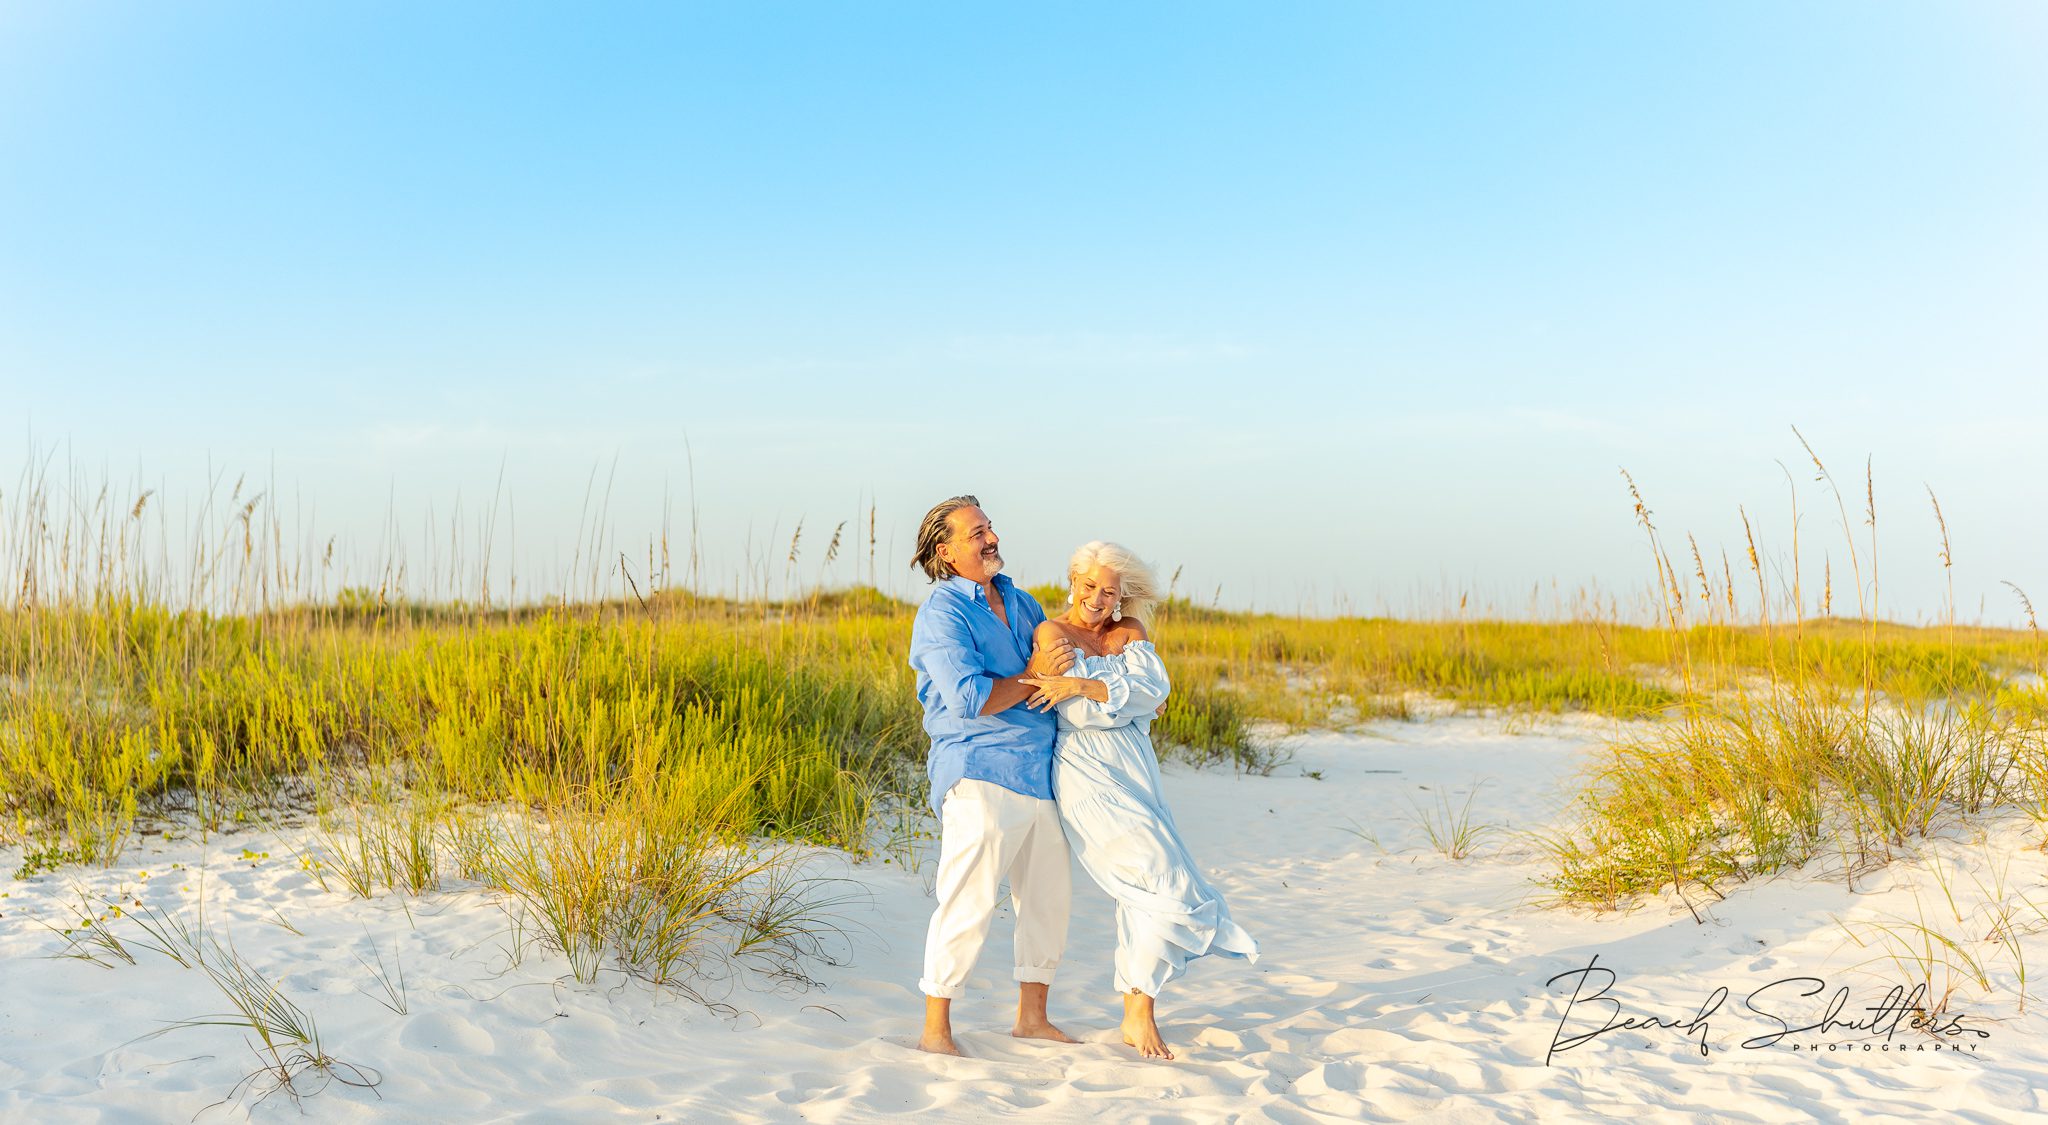 Grandparents getaway photo session by Beach Shutters Photography.